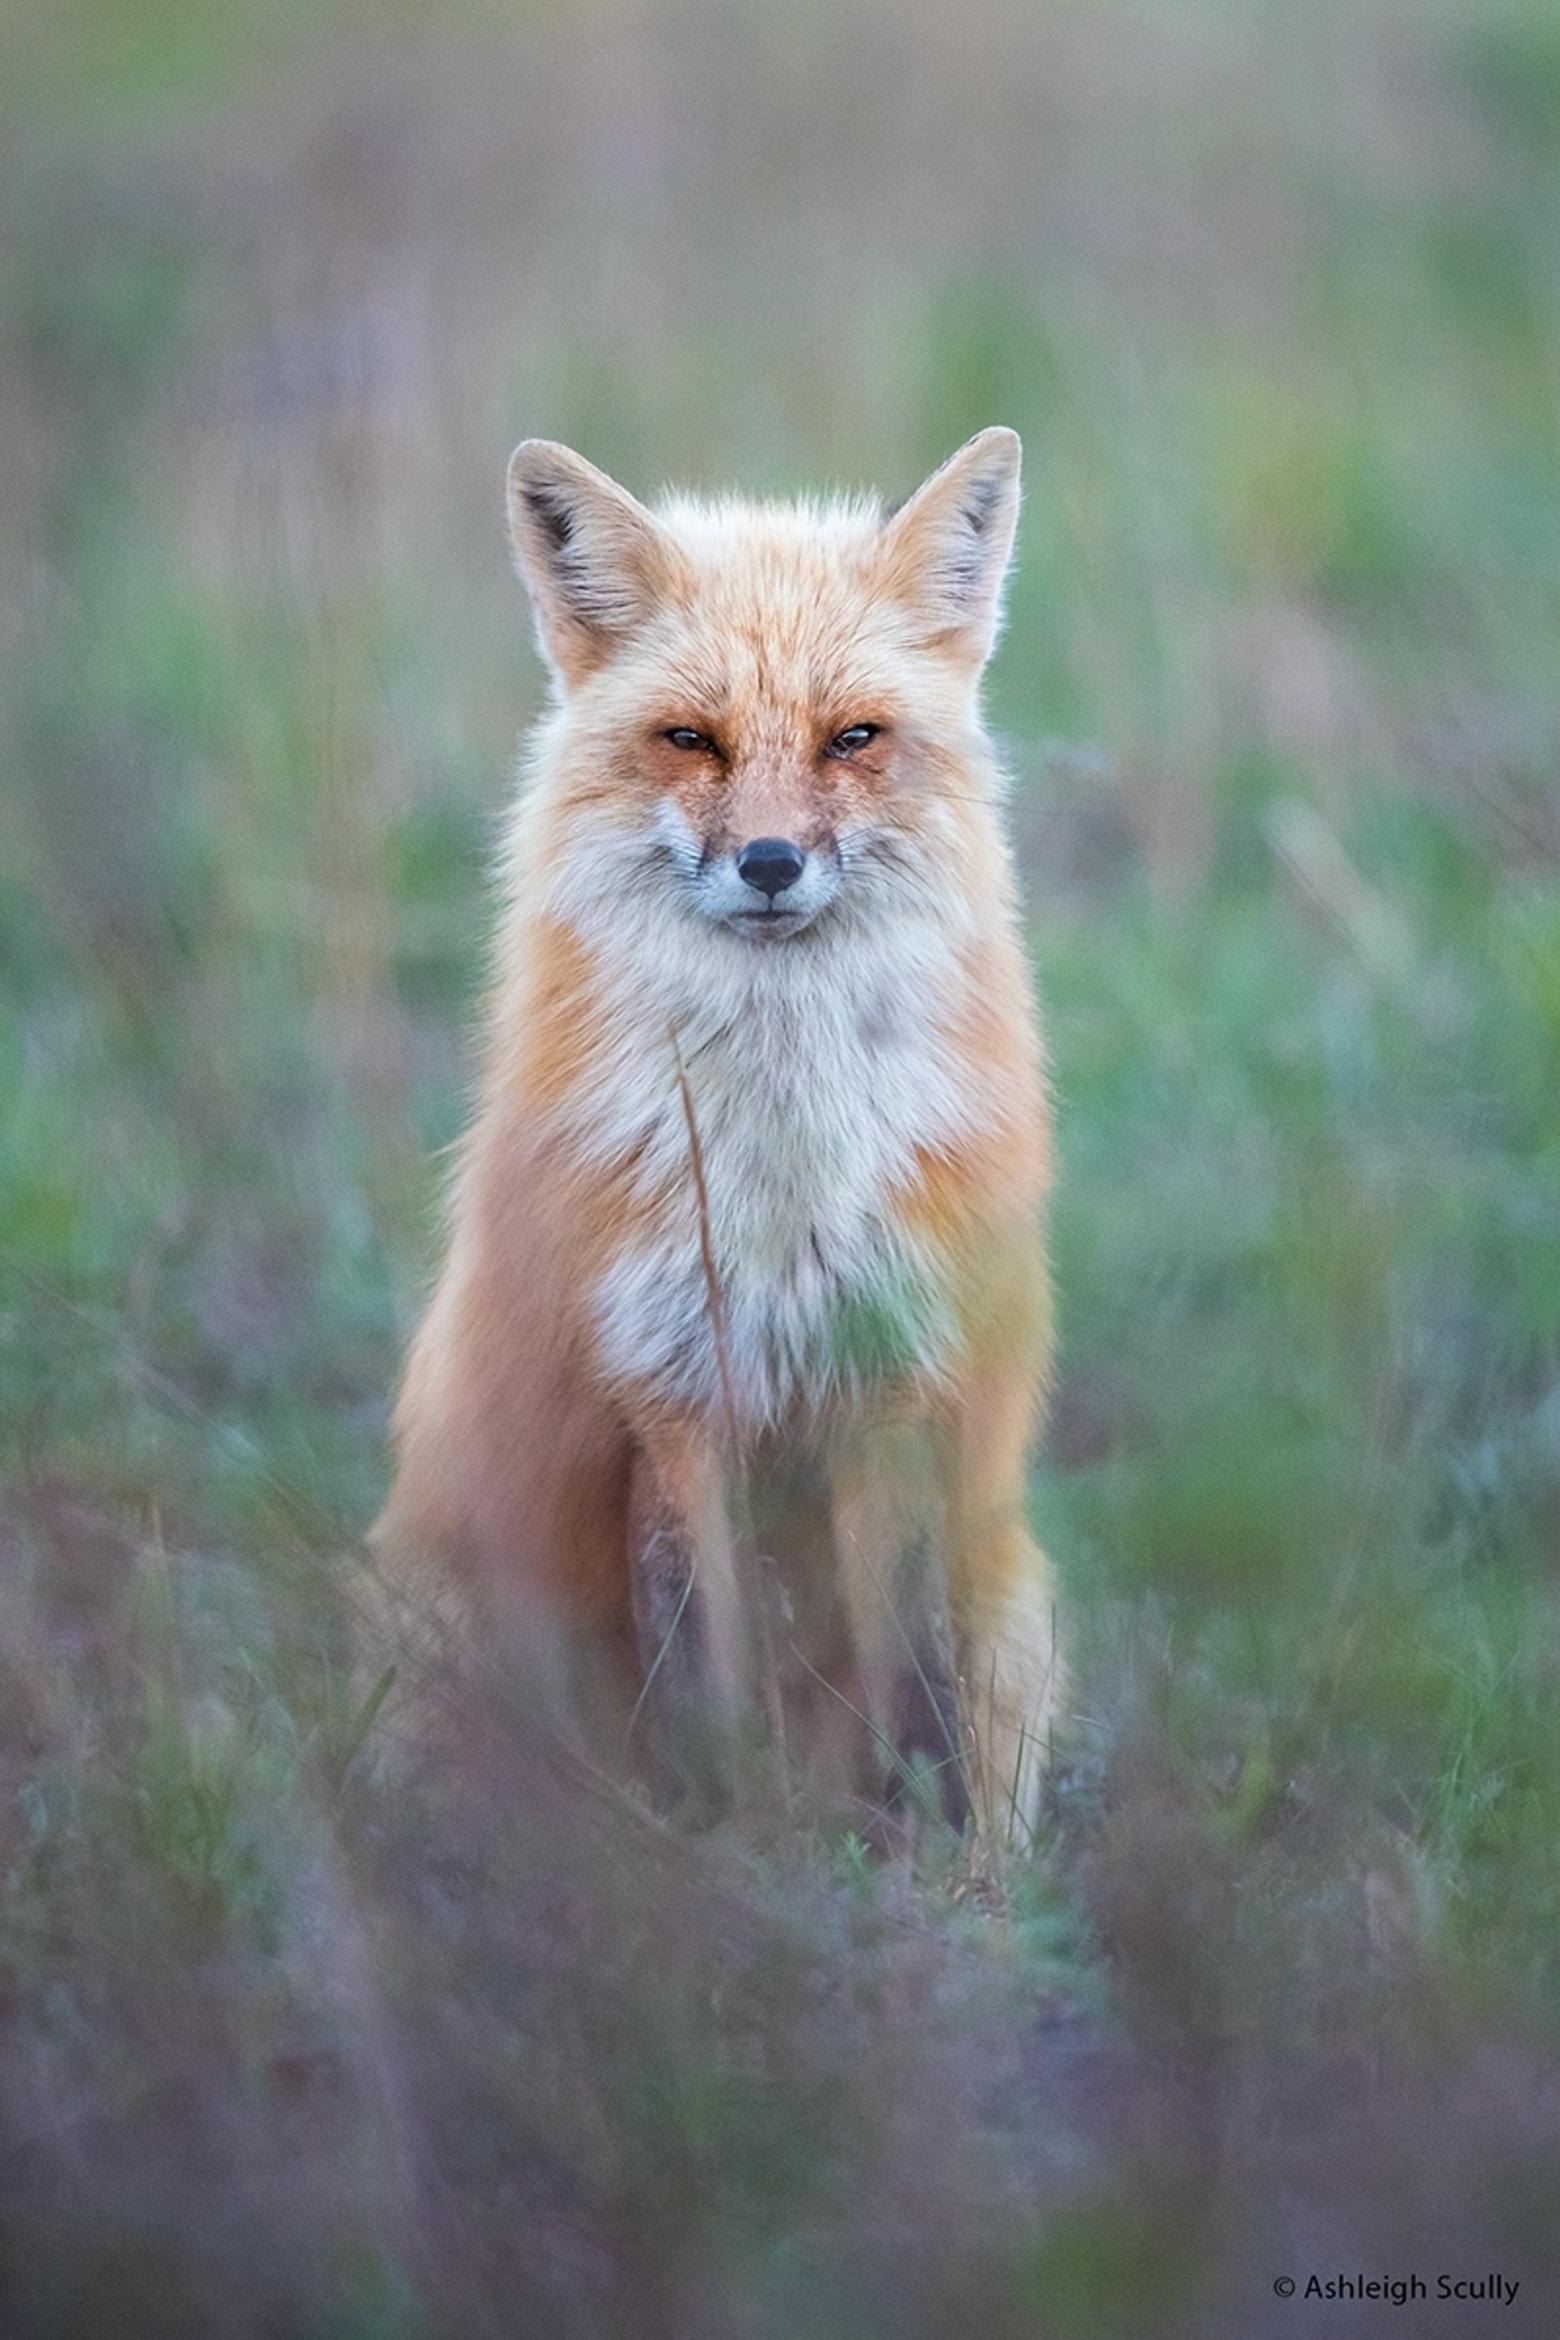 Of this photograph titled &quot;Prince Edward Island Fox,&quot; Scully says, &quot;Last summer I joined a workshop hosted by a non-profit called The Canid Project. The Canid Project educates people about wild canids through photography, writing, ecotourism and community outreach. The workshop was held in Prince Edward Island, Canada and our focus was on the many urban red foxes that call this area home.  In the back of a store parking lot, there was a mud mound where a family of foxes had their den. Behind it and up the hill was a walking path, and behind that was another fox den. I broke off from the workshop group when I spotted this red fox vixen hunting in a field. After photographing this girl for about an hour, I headed back to the group to give her some peace. As the light started to fade, I walked back up the hill one last time to see if she was there, and sure enough she was, sitting still as if she were waiting for me. I quietly sat down in the grass and balanced my lens on my knees, changing to a vertical composition. She sat patiently as I clicked away. This was one of the most peaceful and humbling experiences I have ever had with a red fox. This summer I will be co-leading a workshop for teens there, and I hope to see this beautiful vixen again.&quot;